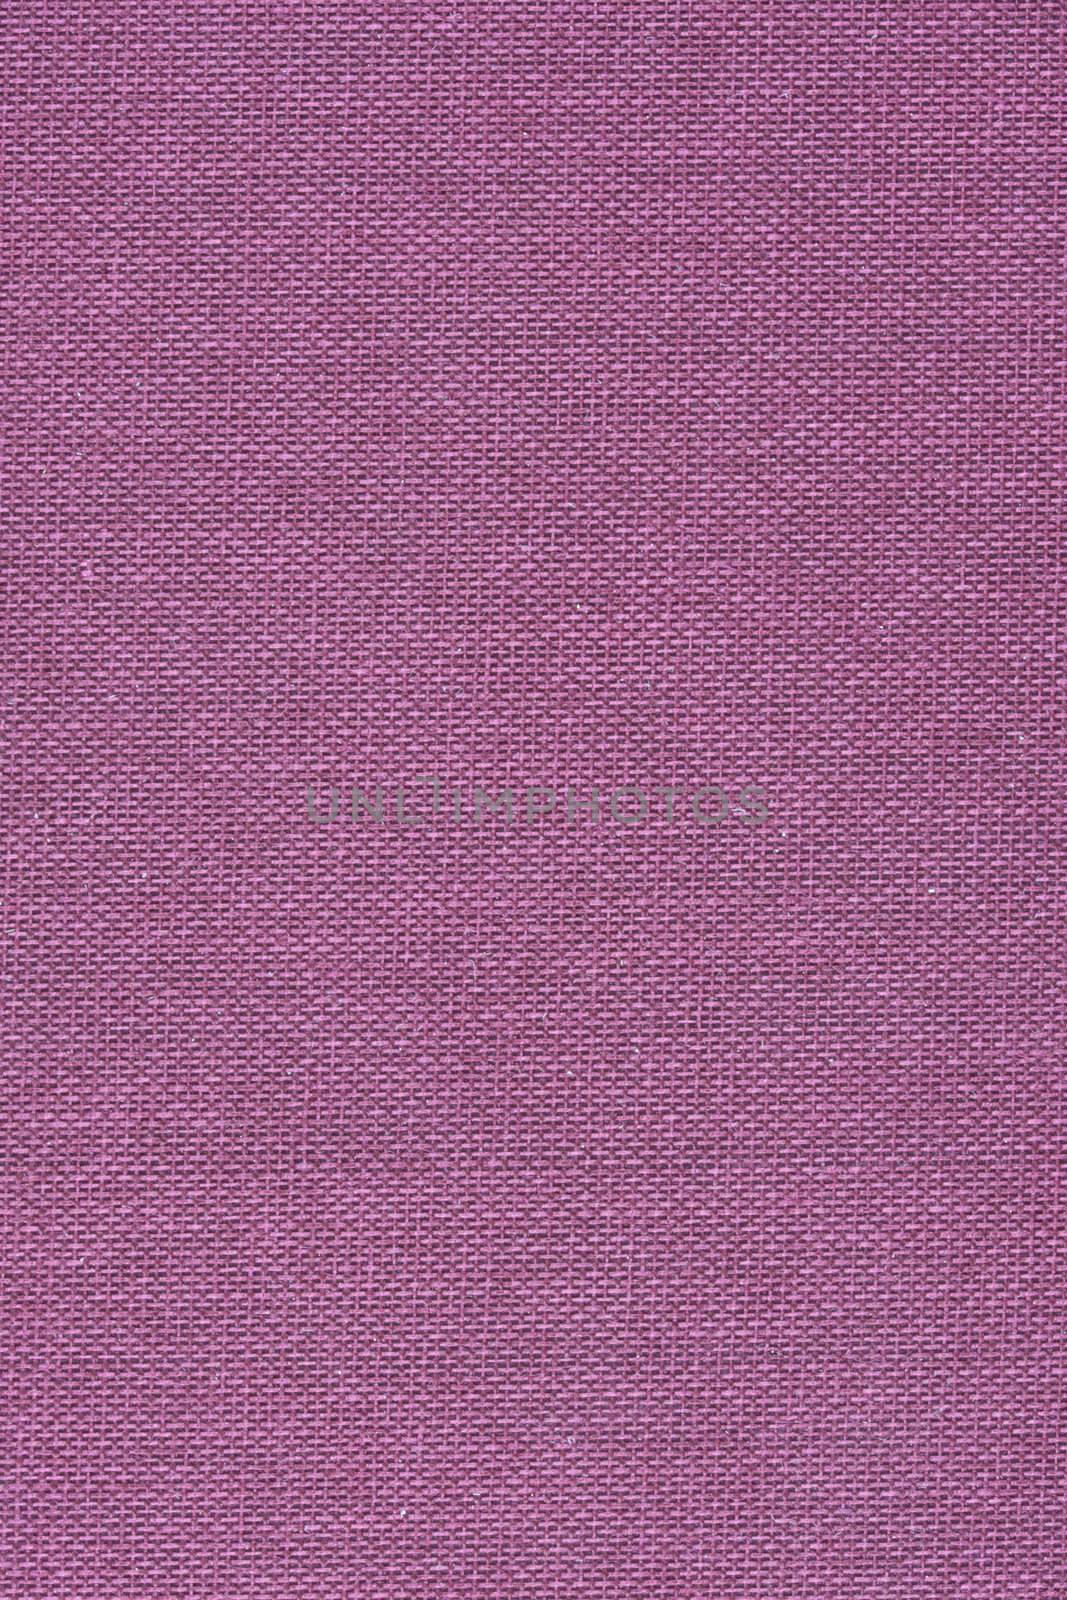 pink canvas background by PixelsAway